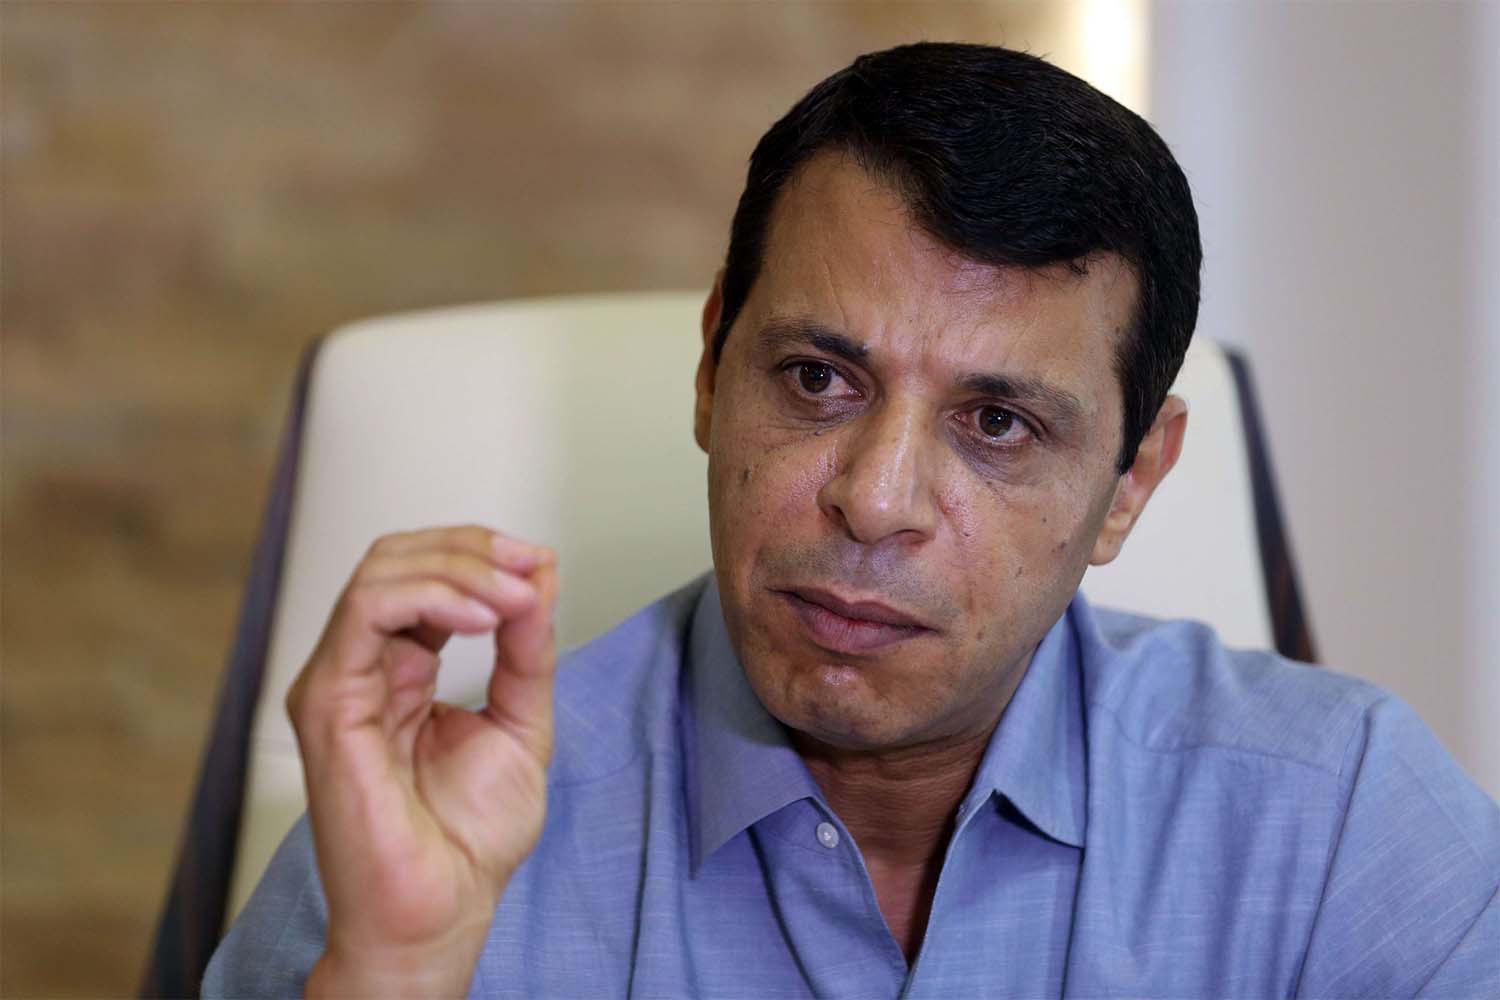 Dahlan has long been floated as a potential successor to Abbas